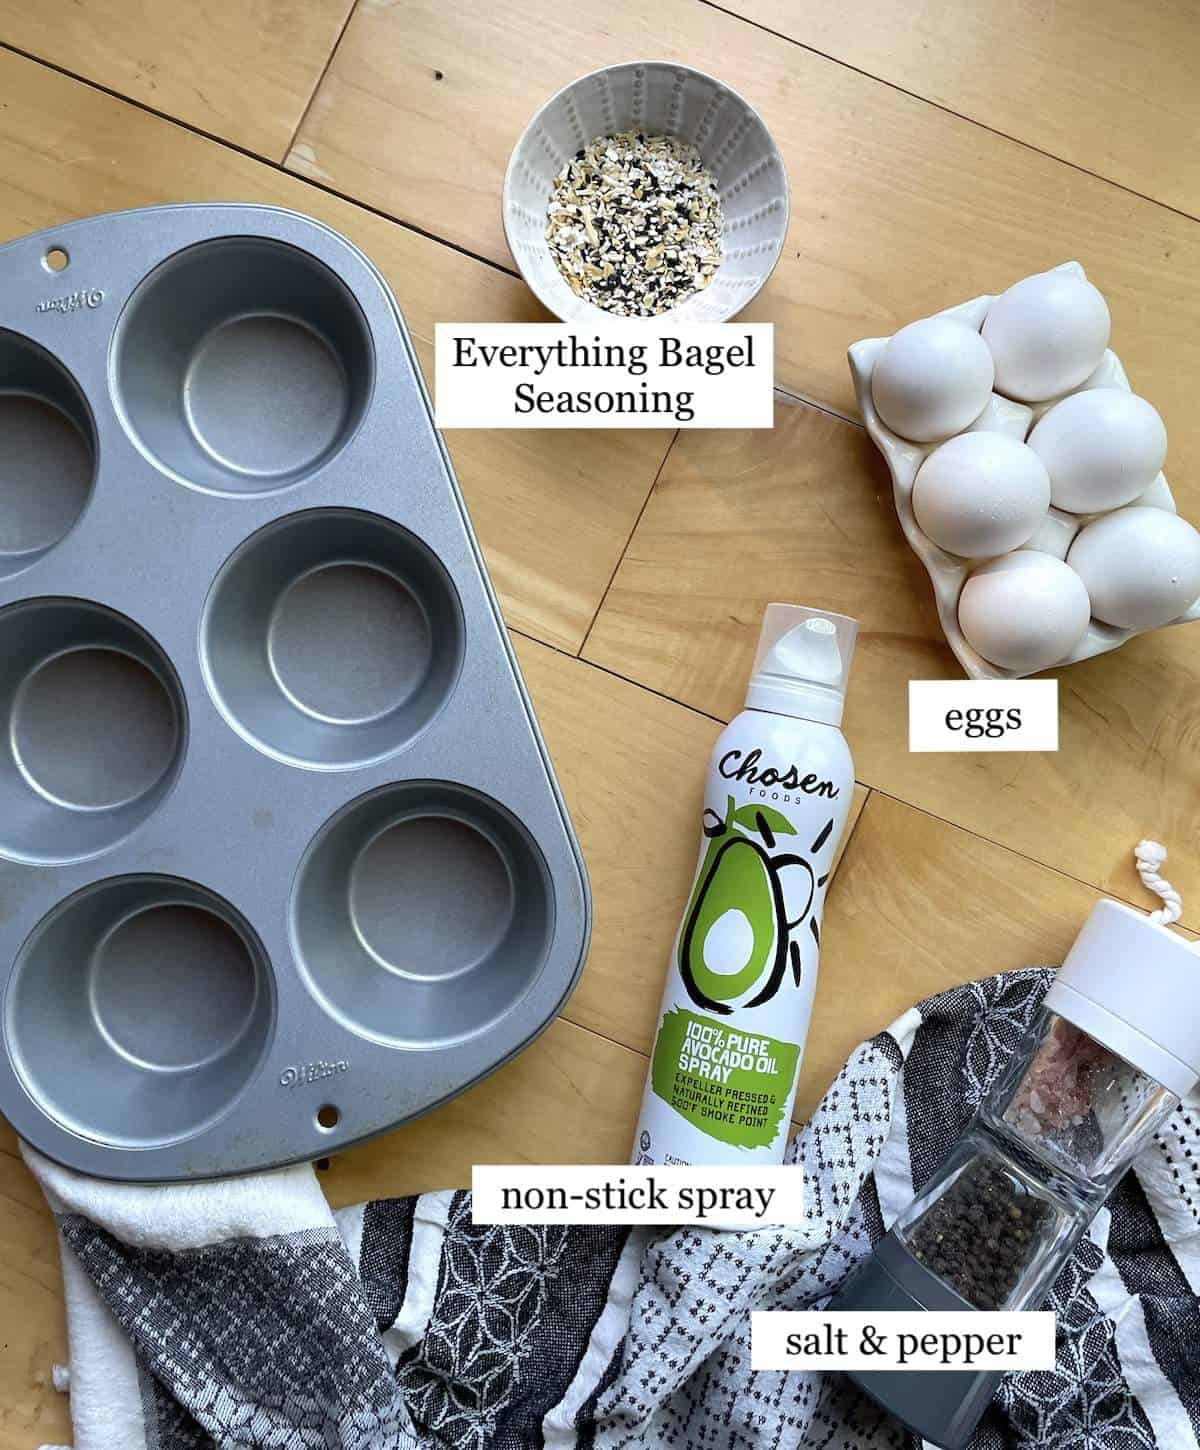 The ingredients needed to bake eggs in a muffin tin, laid out and labeled.